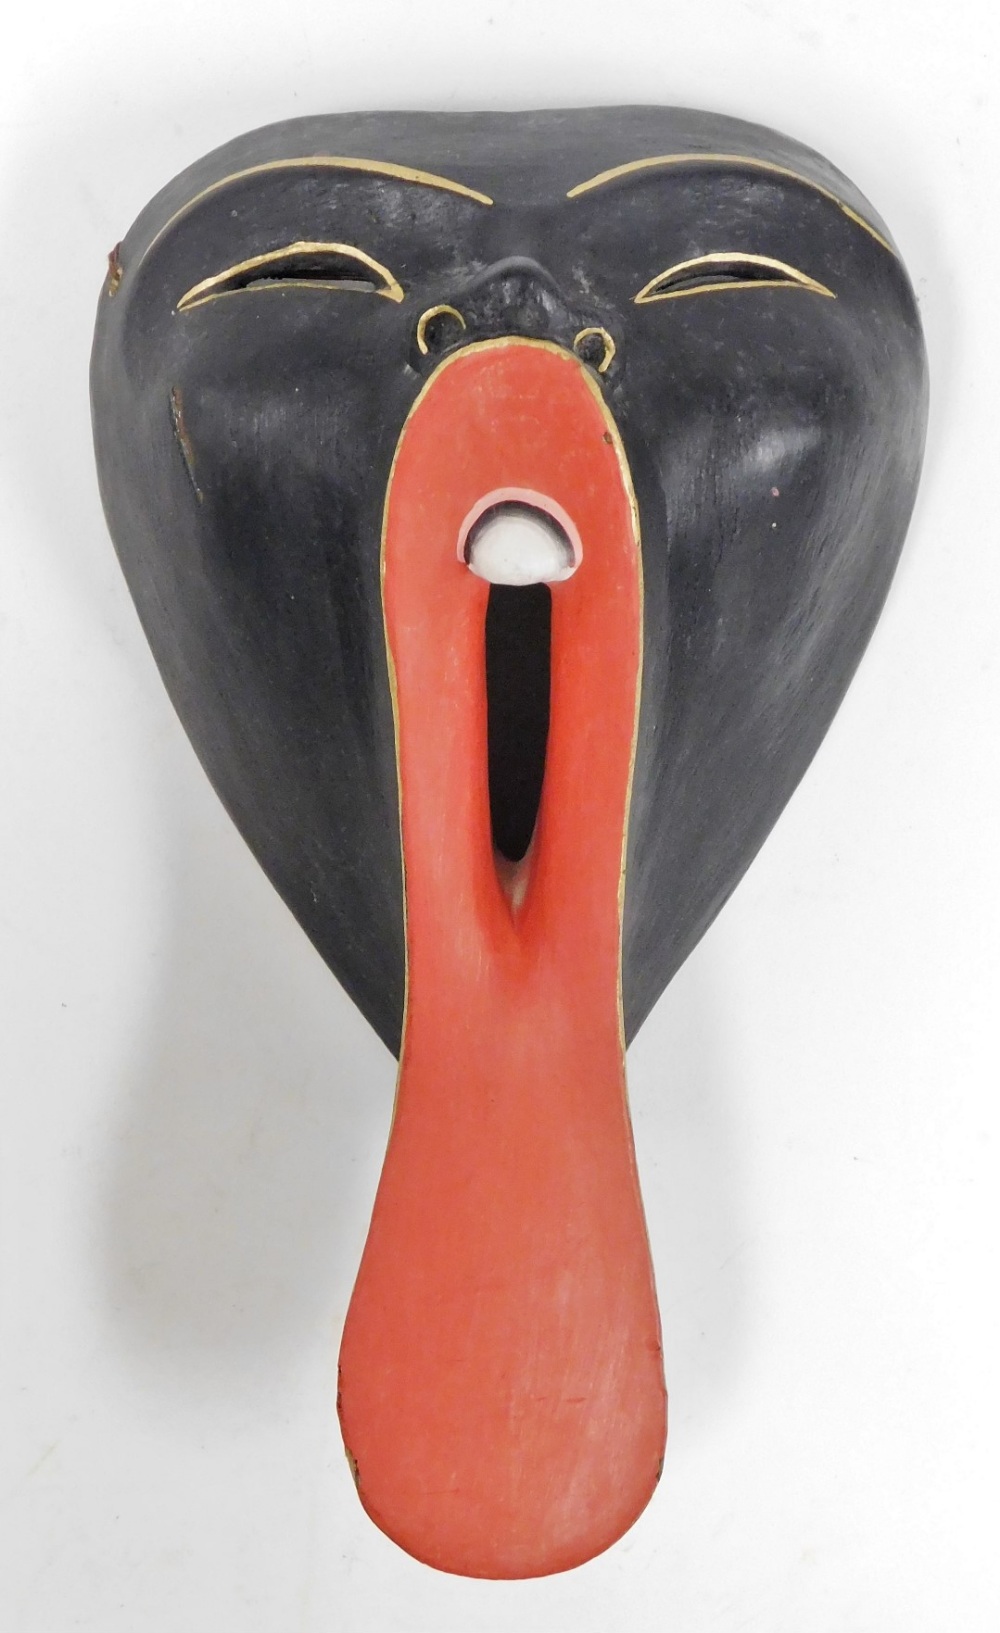 Two wooden Eastern wall masks, each depicting a screaming figure with large open mouth, one black on - Image 6 of 8